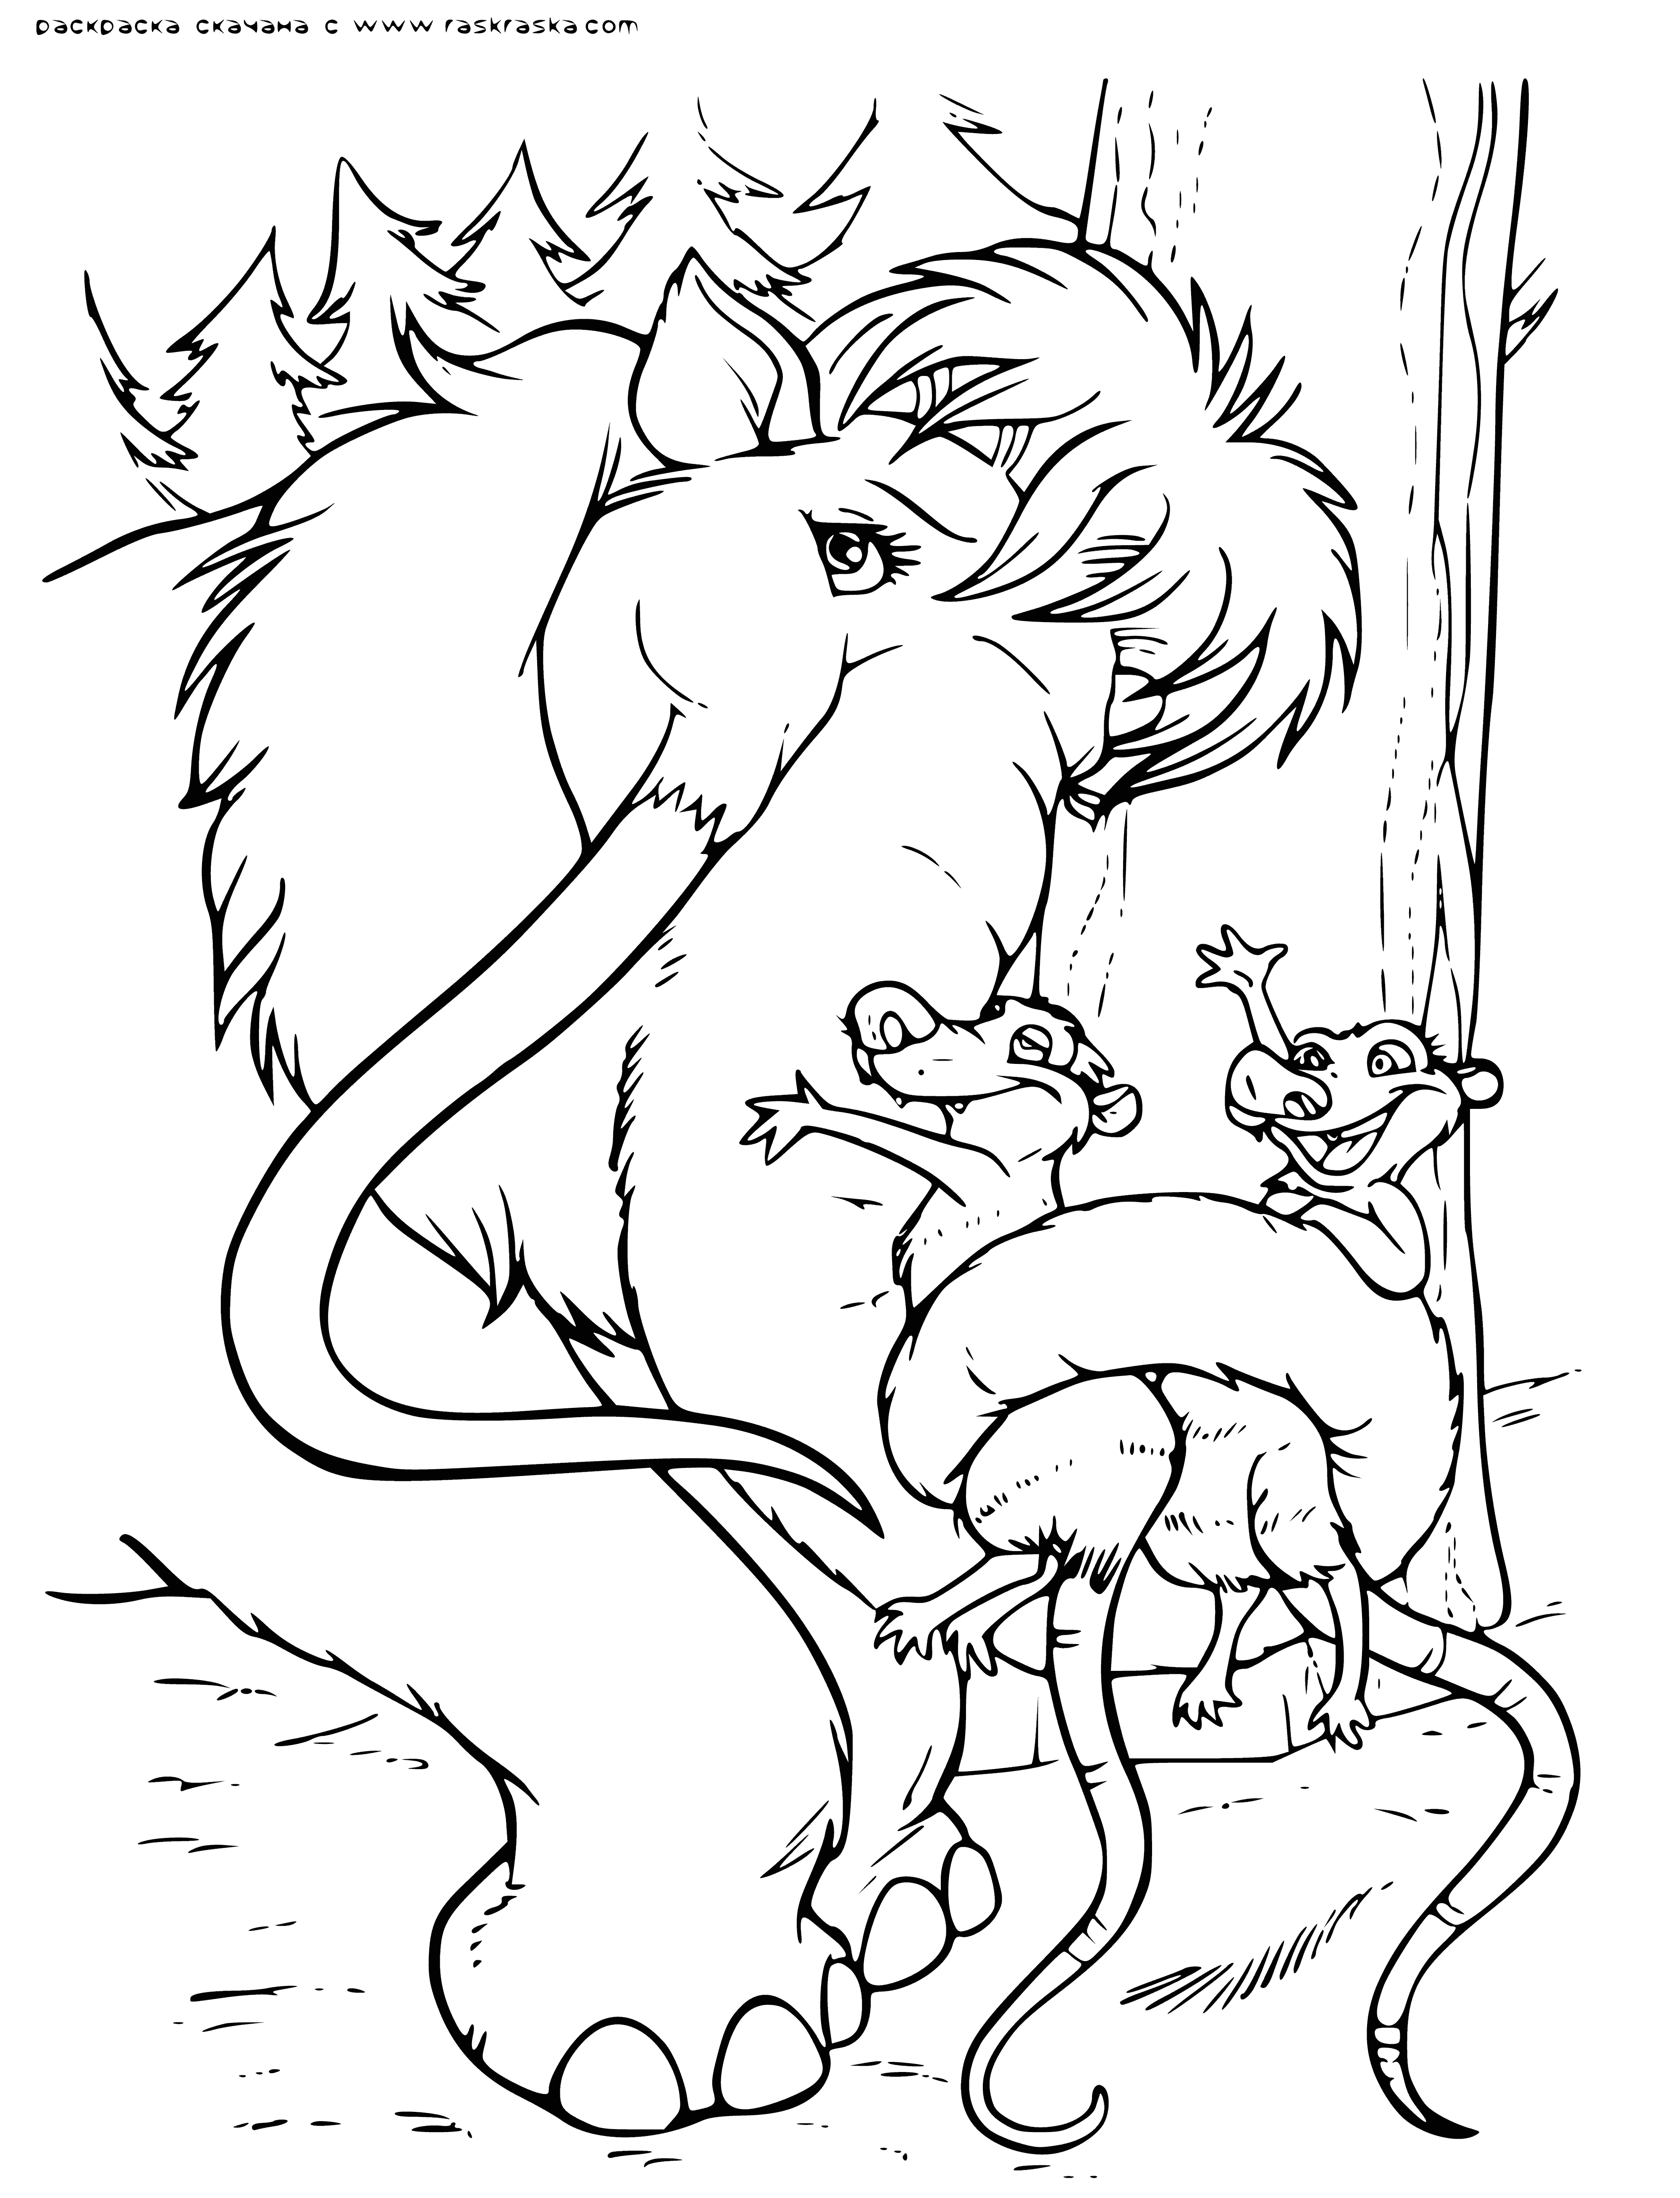 coloring page: Brother and sister share a peaceful moment in a beautiful Ice Age landscape, surrounded by a pink and orange sky.